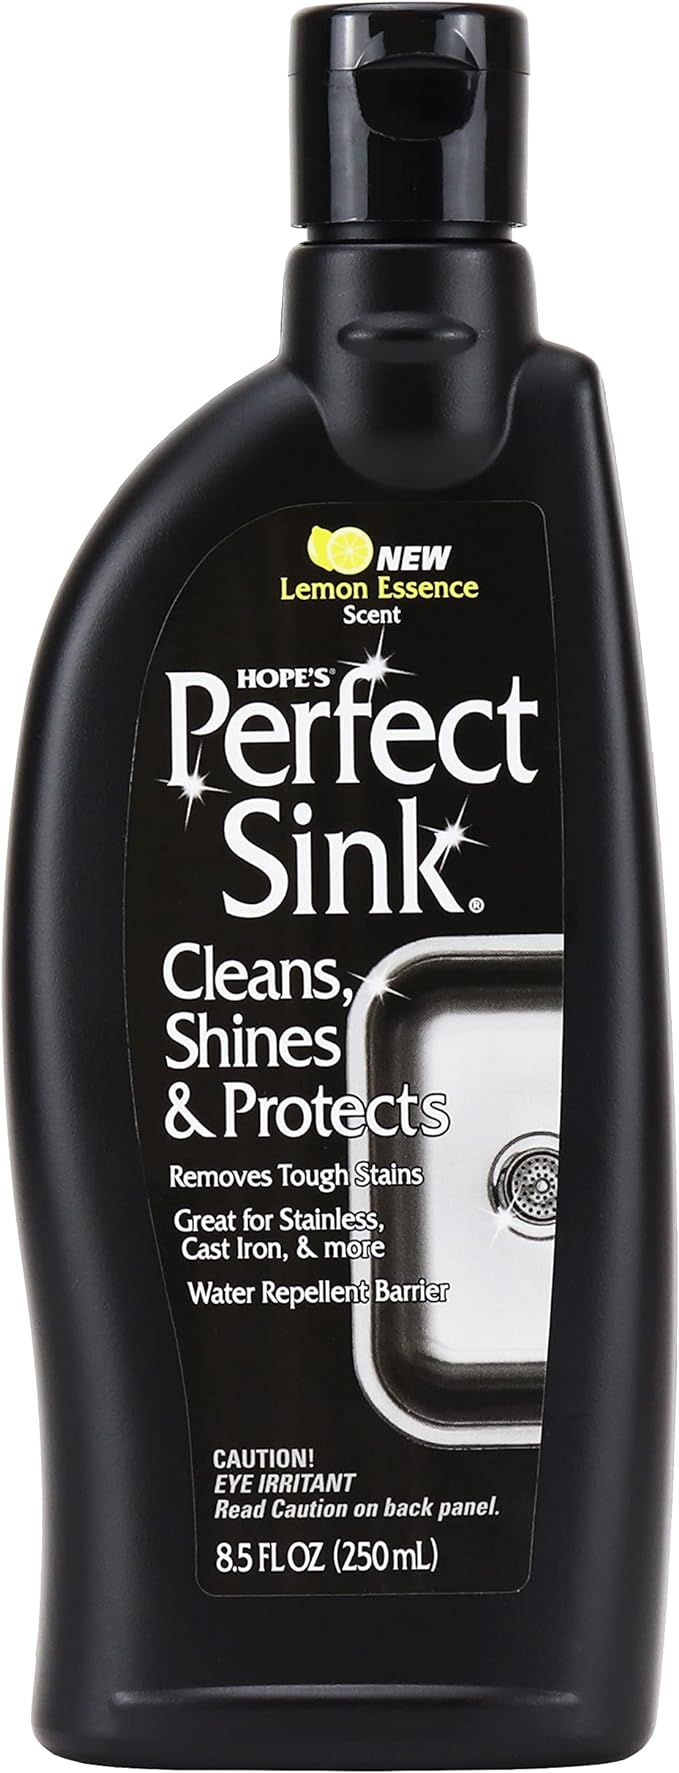 HOPE'S Perfect Sink Cleaner and Polish, Restorative, Removes Stains, Cast Iron, Corian, Composite... | Amazon (US)